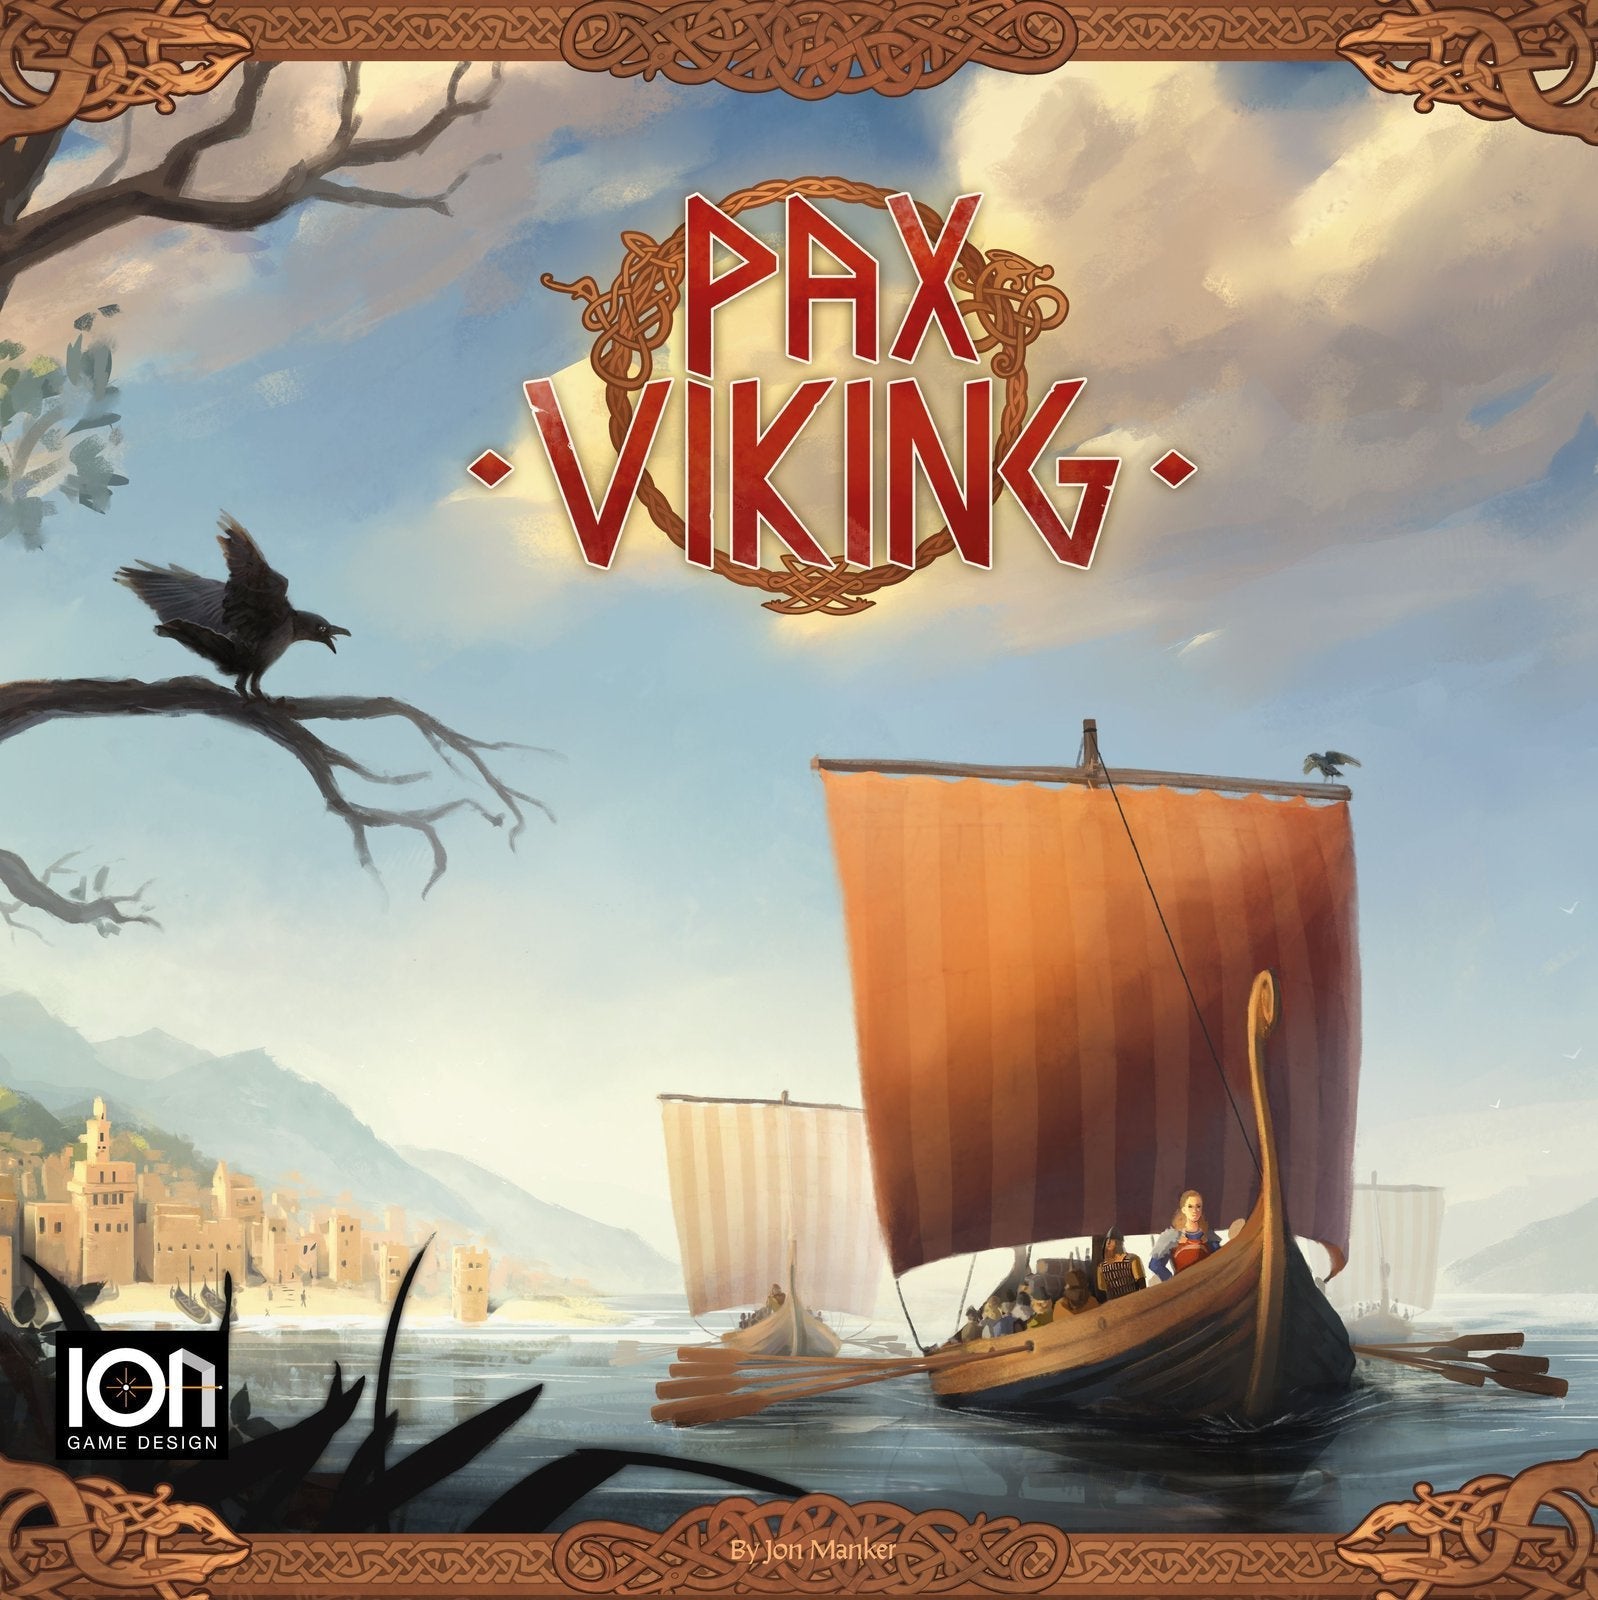 PAX Viking Board Game - Cover illustration